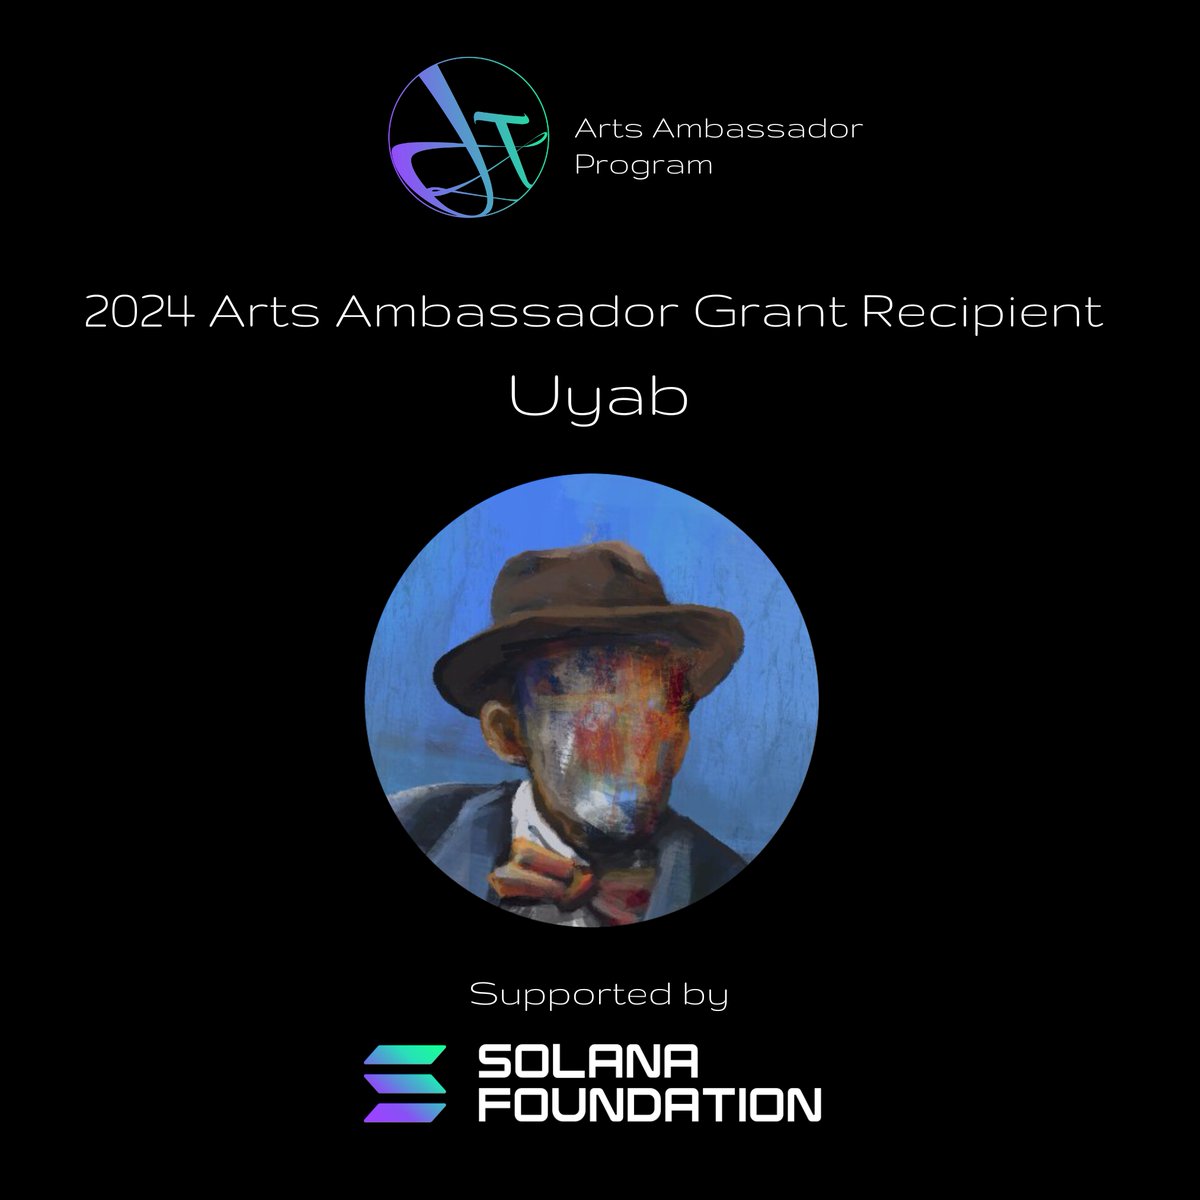 Happy to announce @uyabonly as a new Arts Ambassador Grant Recipient for Q2. Uyab will be producing an exhibition and event for the South East Asian art community in Indonesia this June. Happy to see more artists working to bring groups of creatives together in this manner.